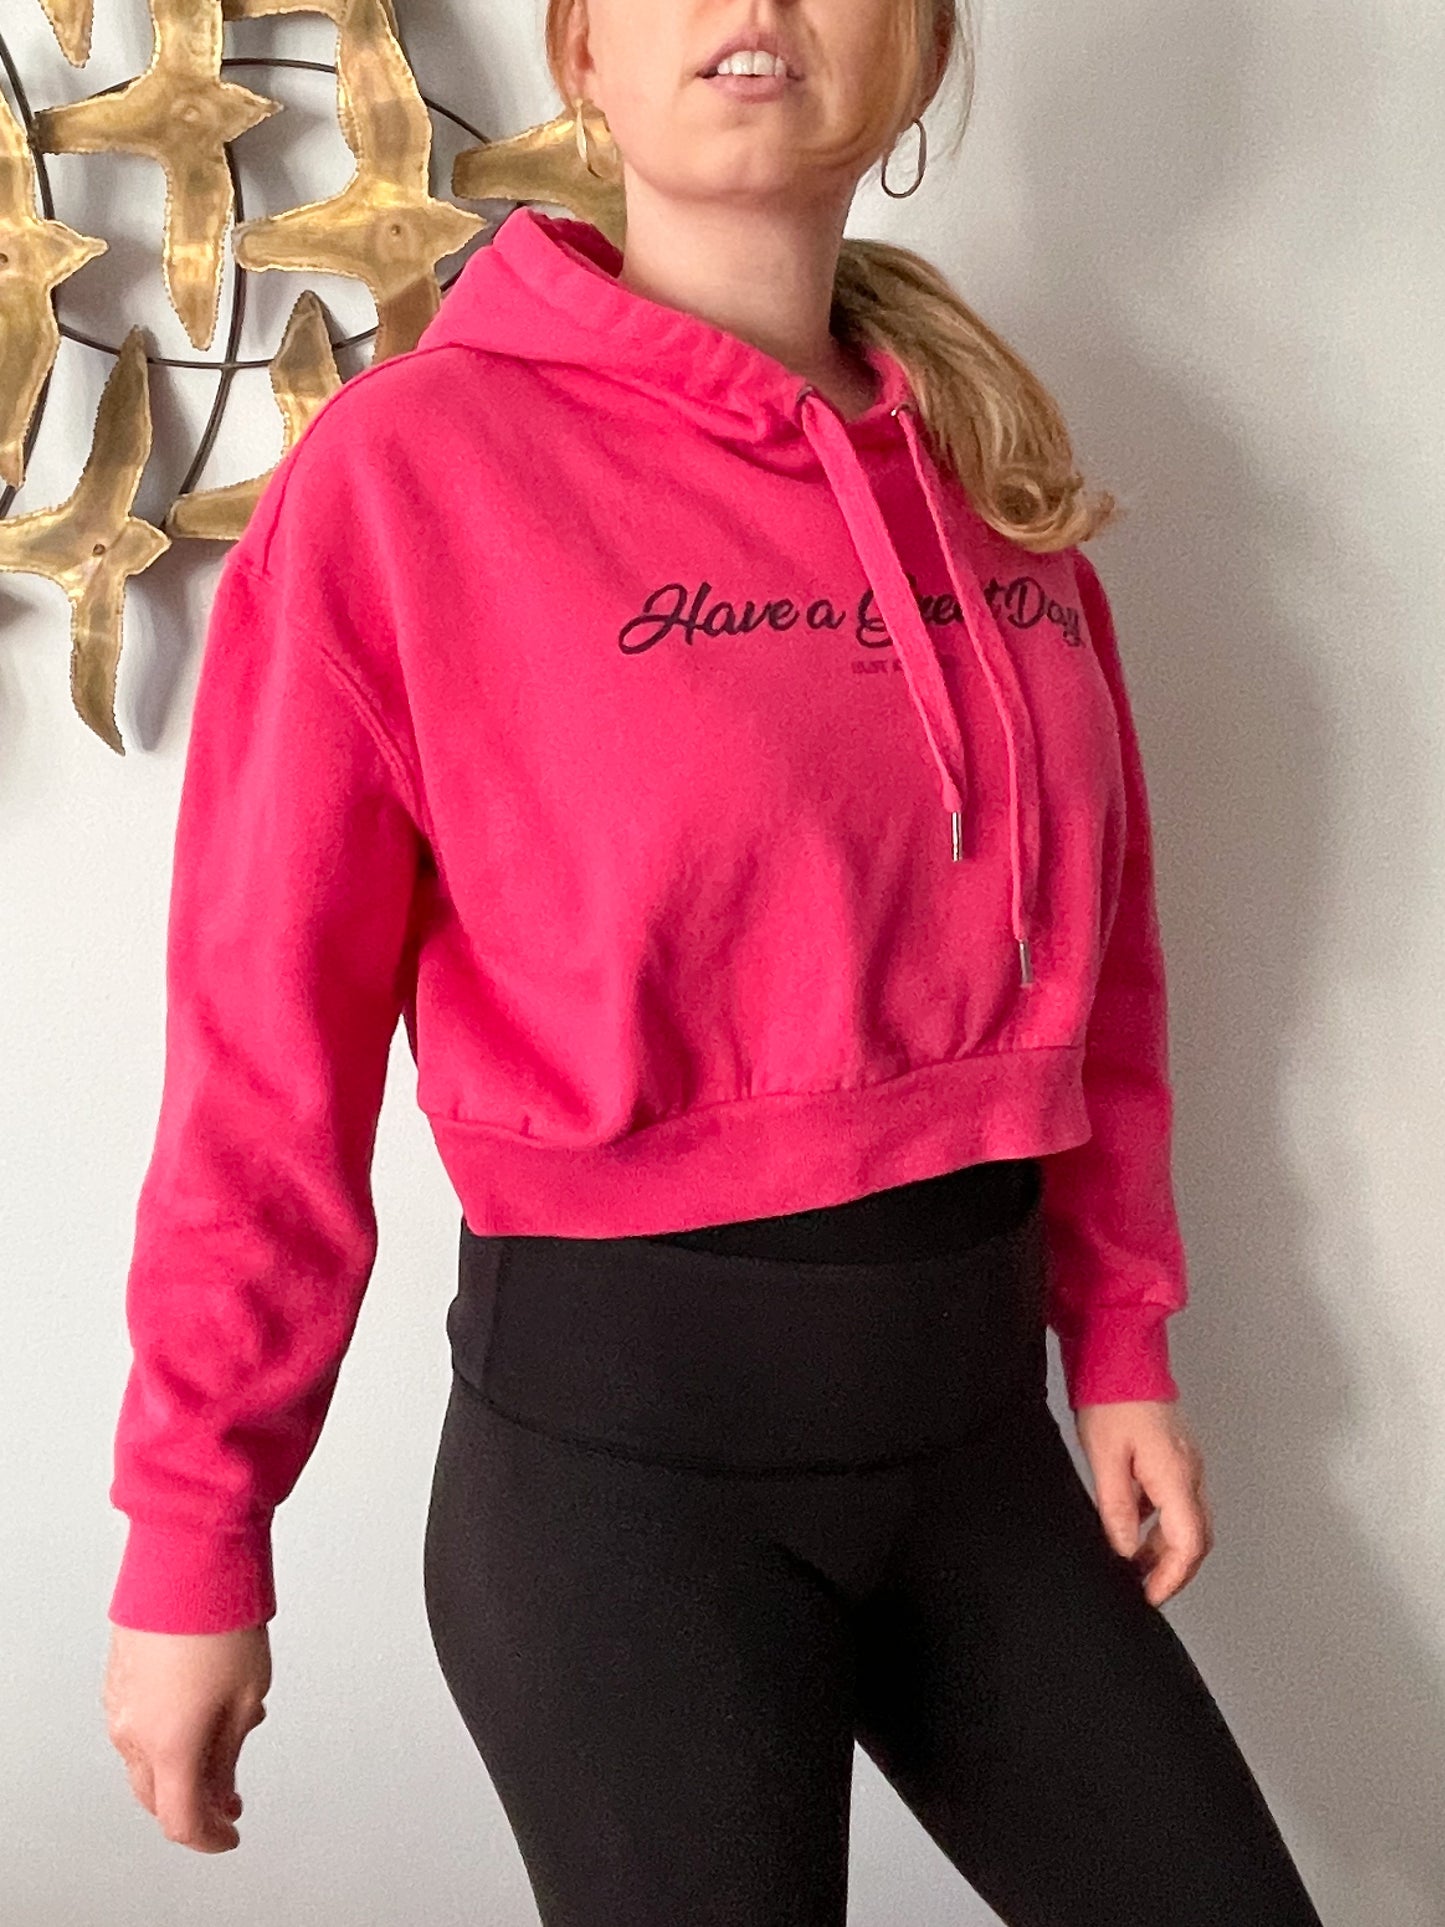 Have a Great Day Ironic Graphic Pink Cropped Hoodie Sweater - S/M/L